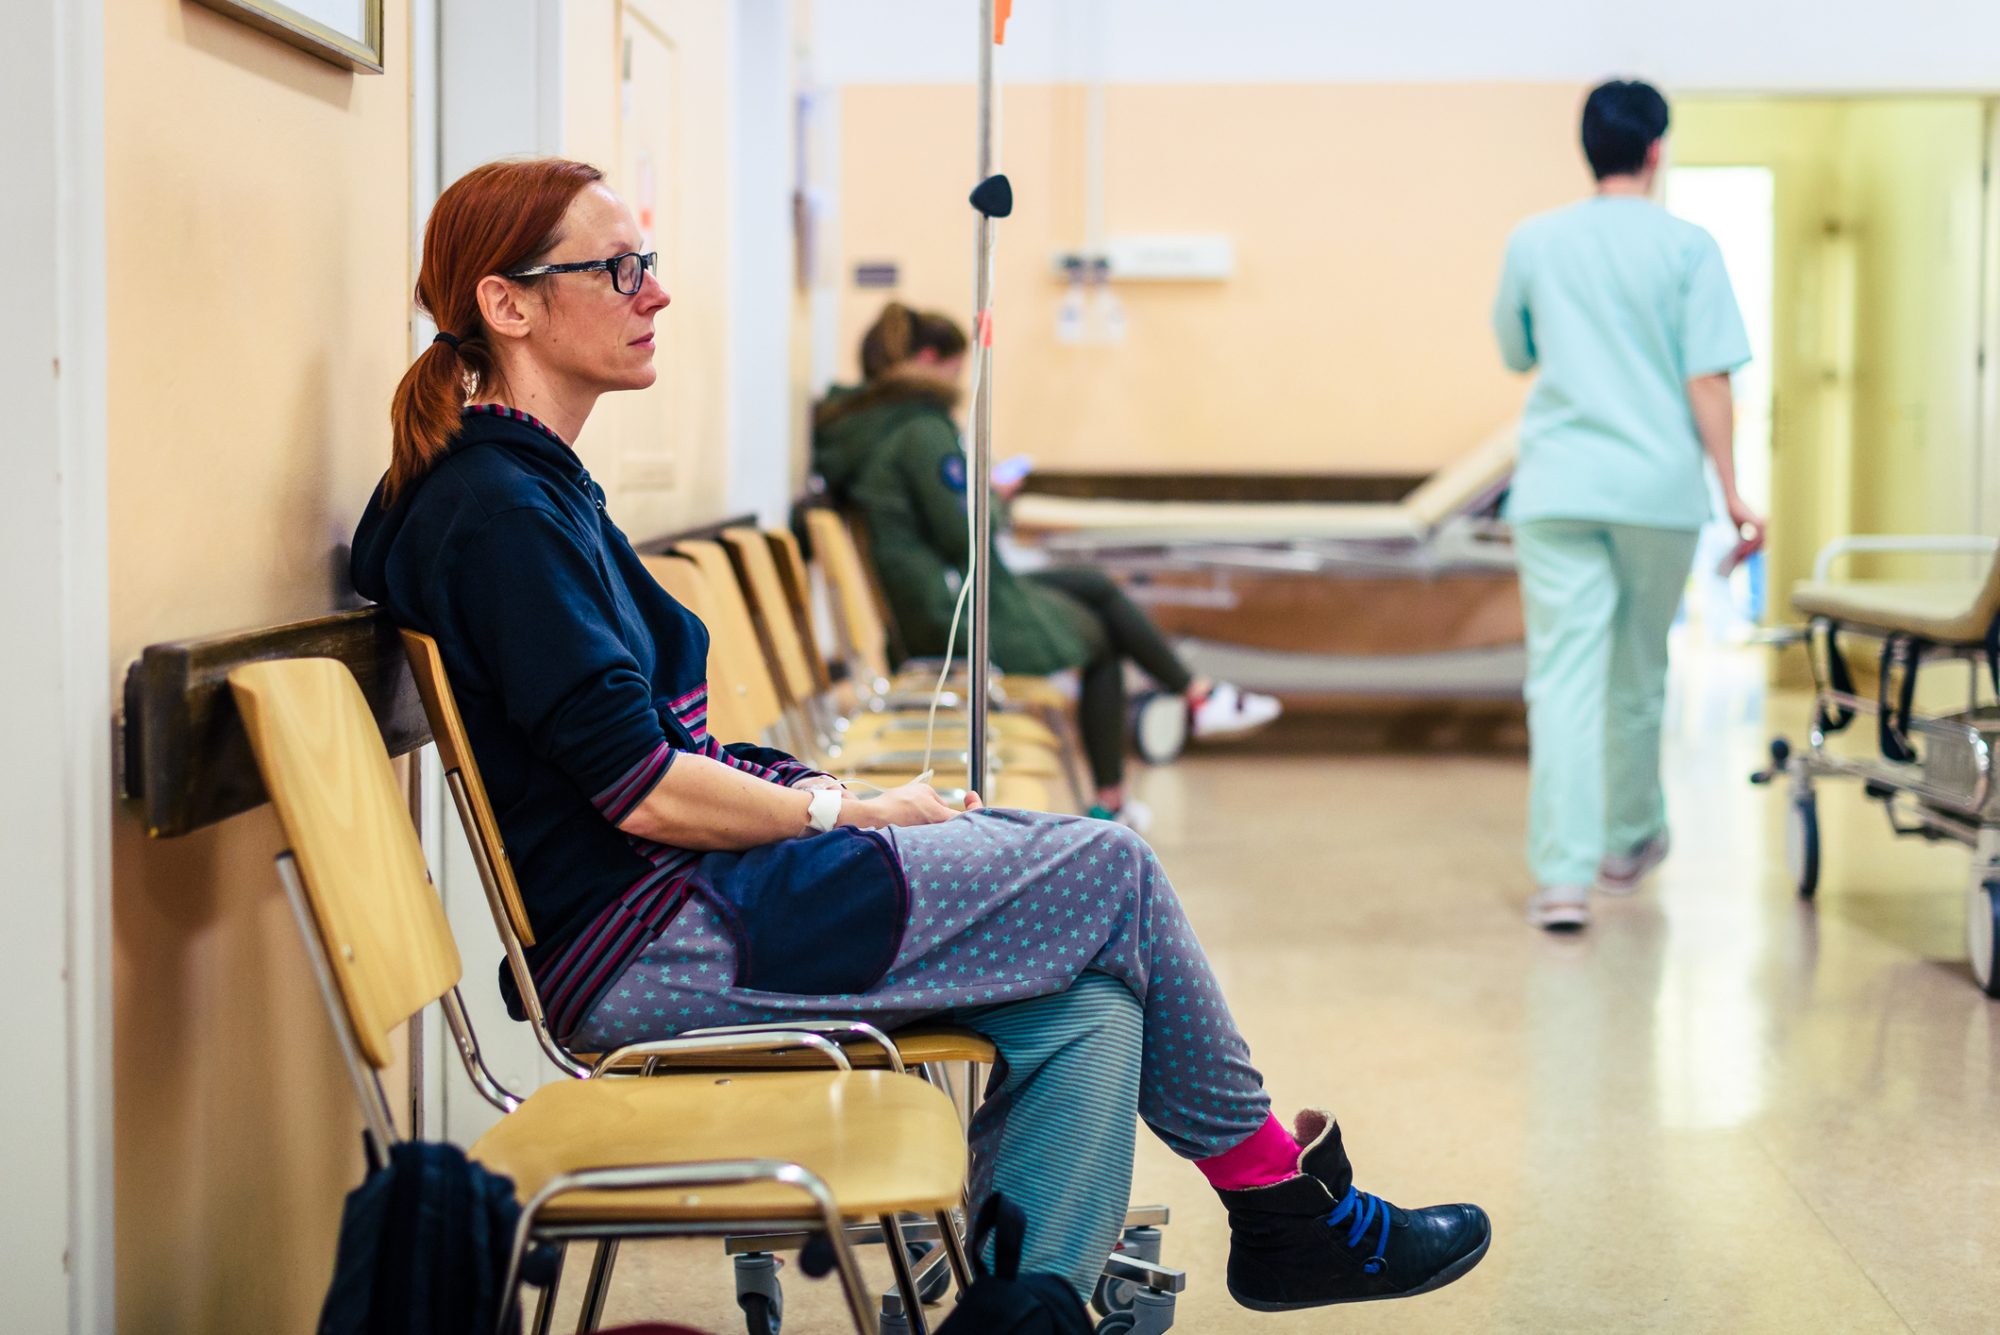 Patient sitting in hospital ward hallway waiting room with iv